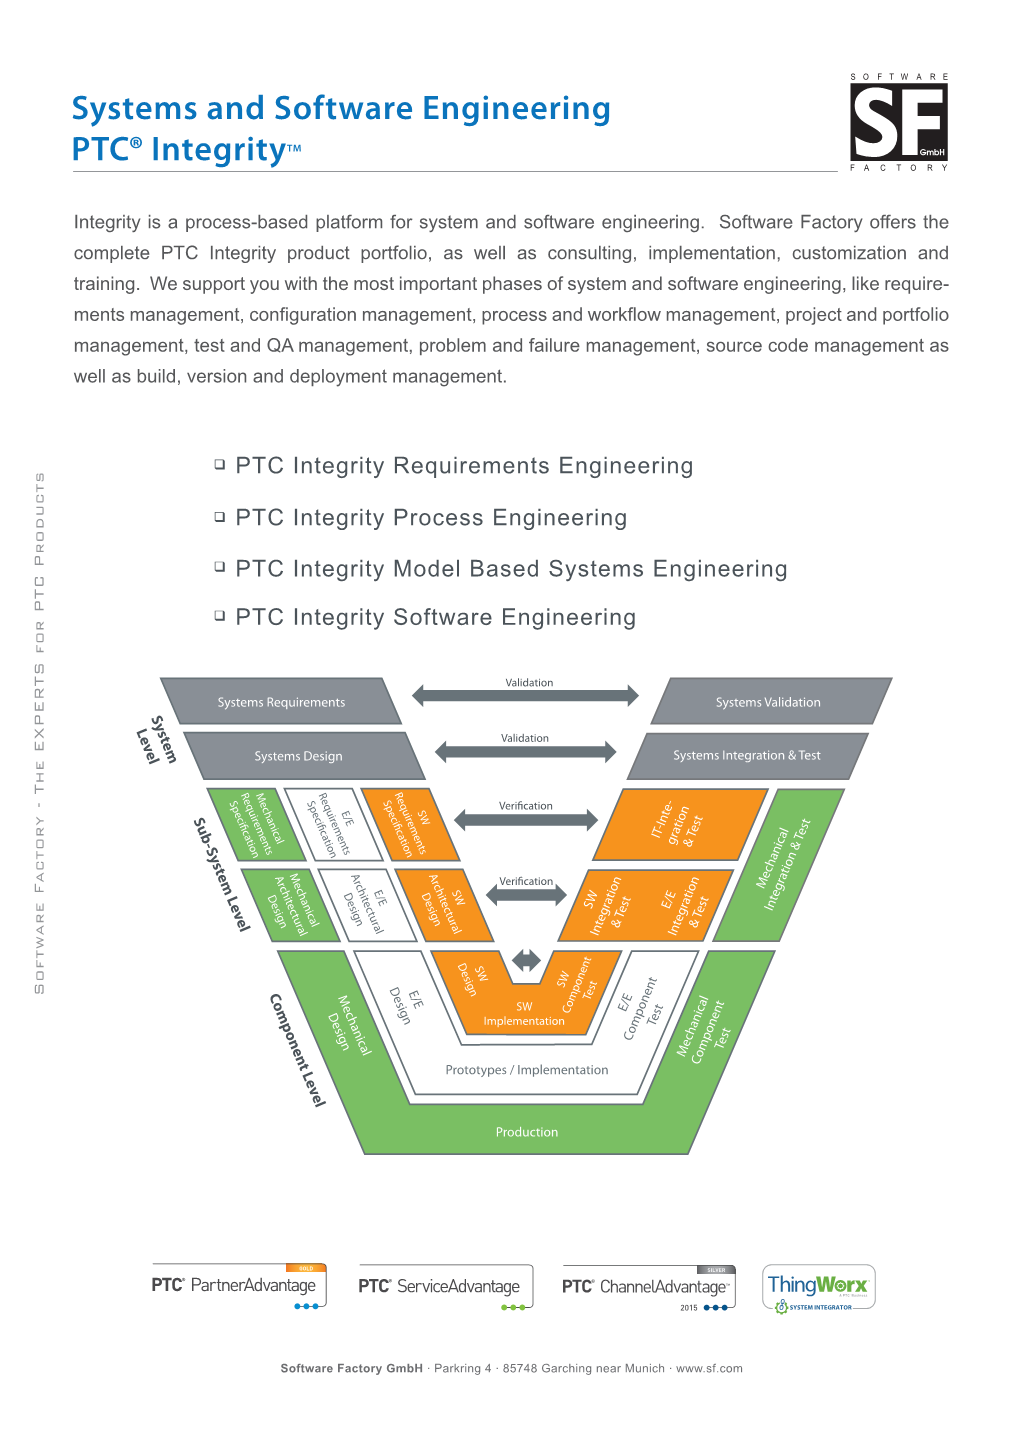 Systems and Software Engineering PTC® Integritytm